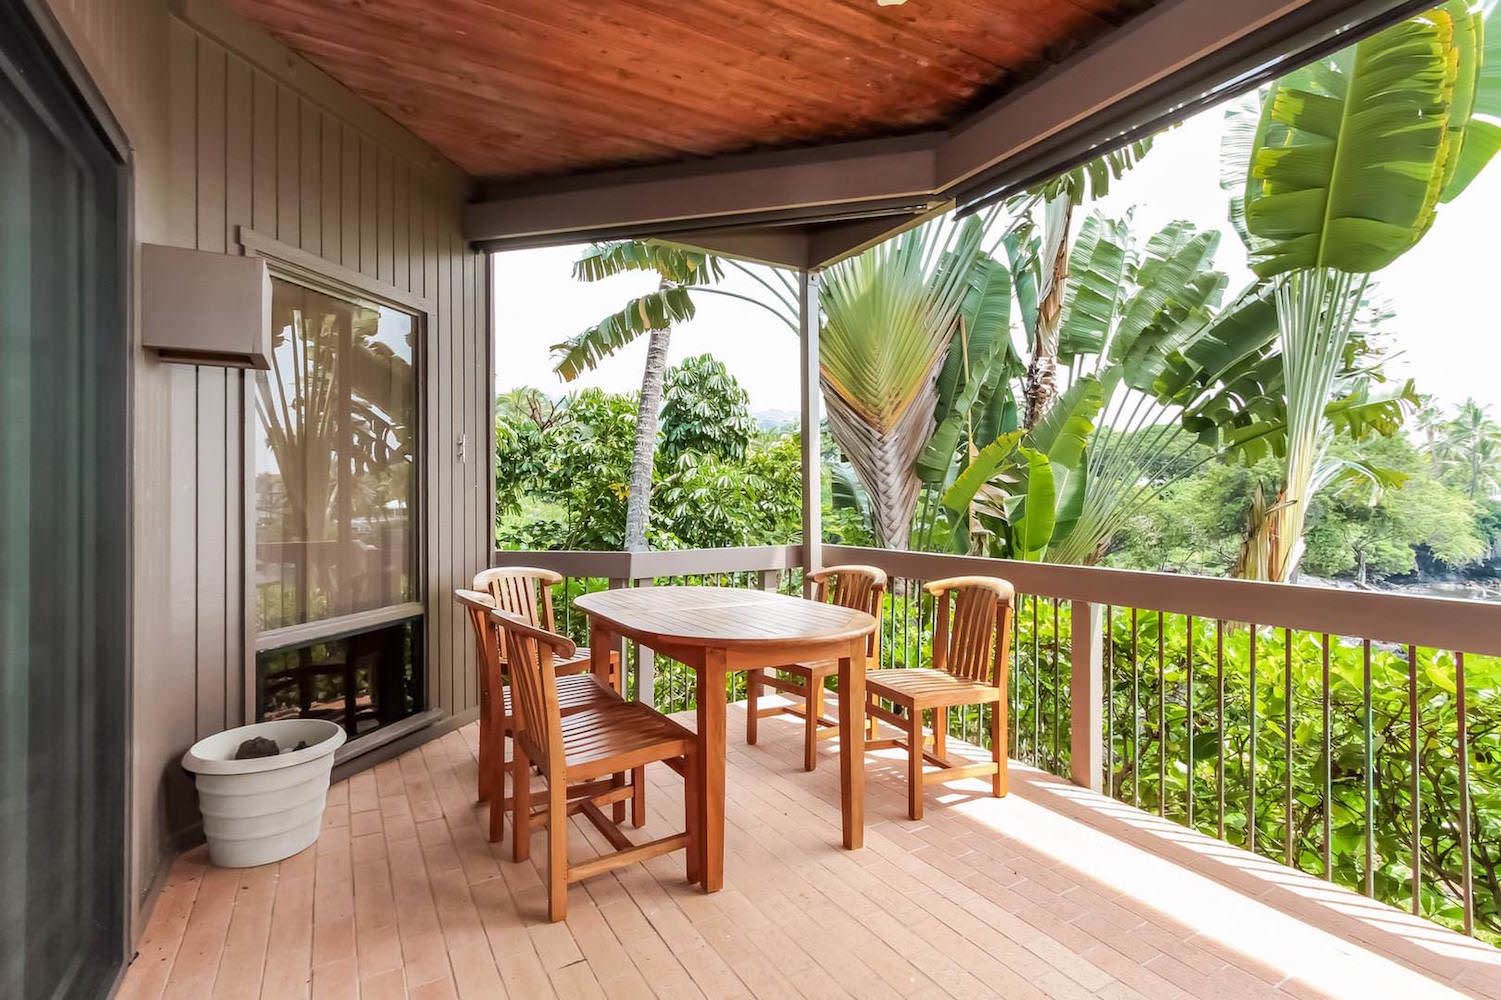 Covered lanai with patio table